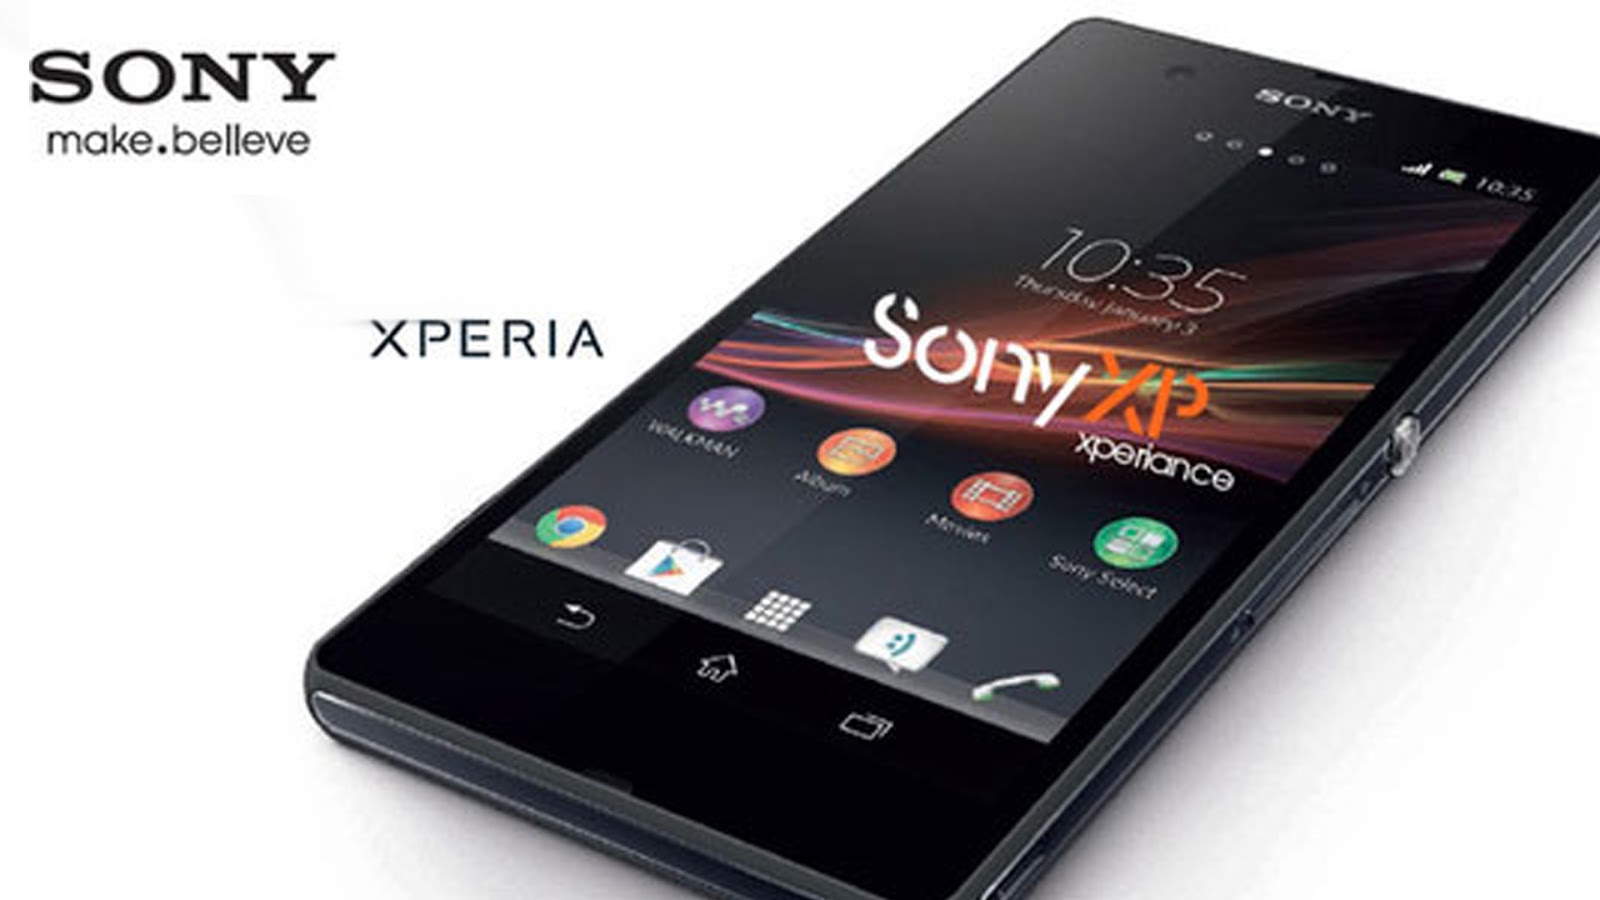 Xperia Z HD Wallpaper Check Out The Cool Sony Ericsson